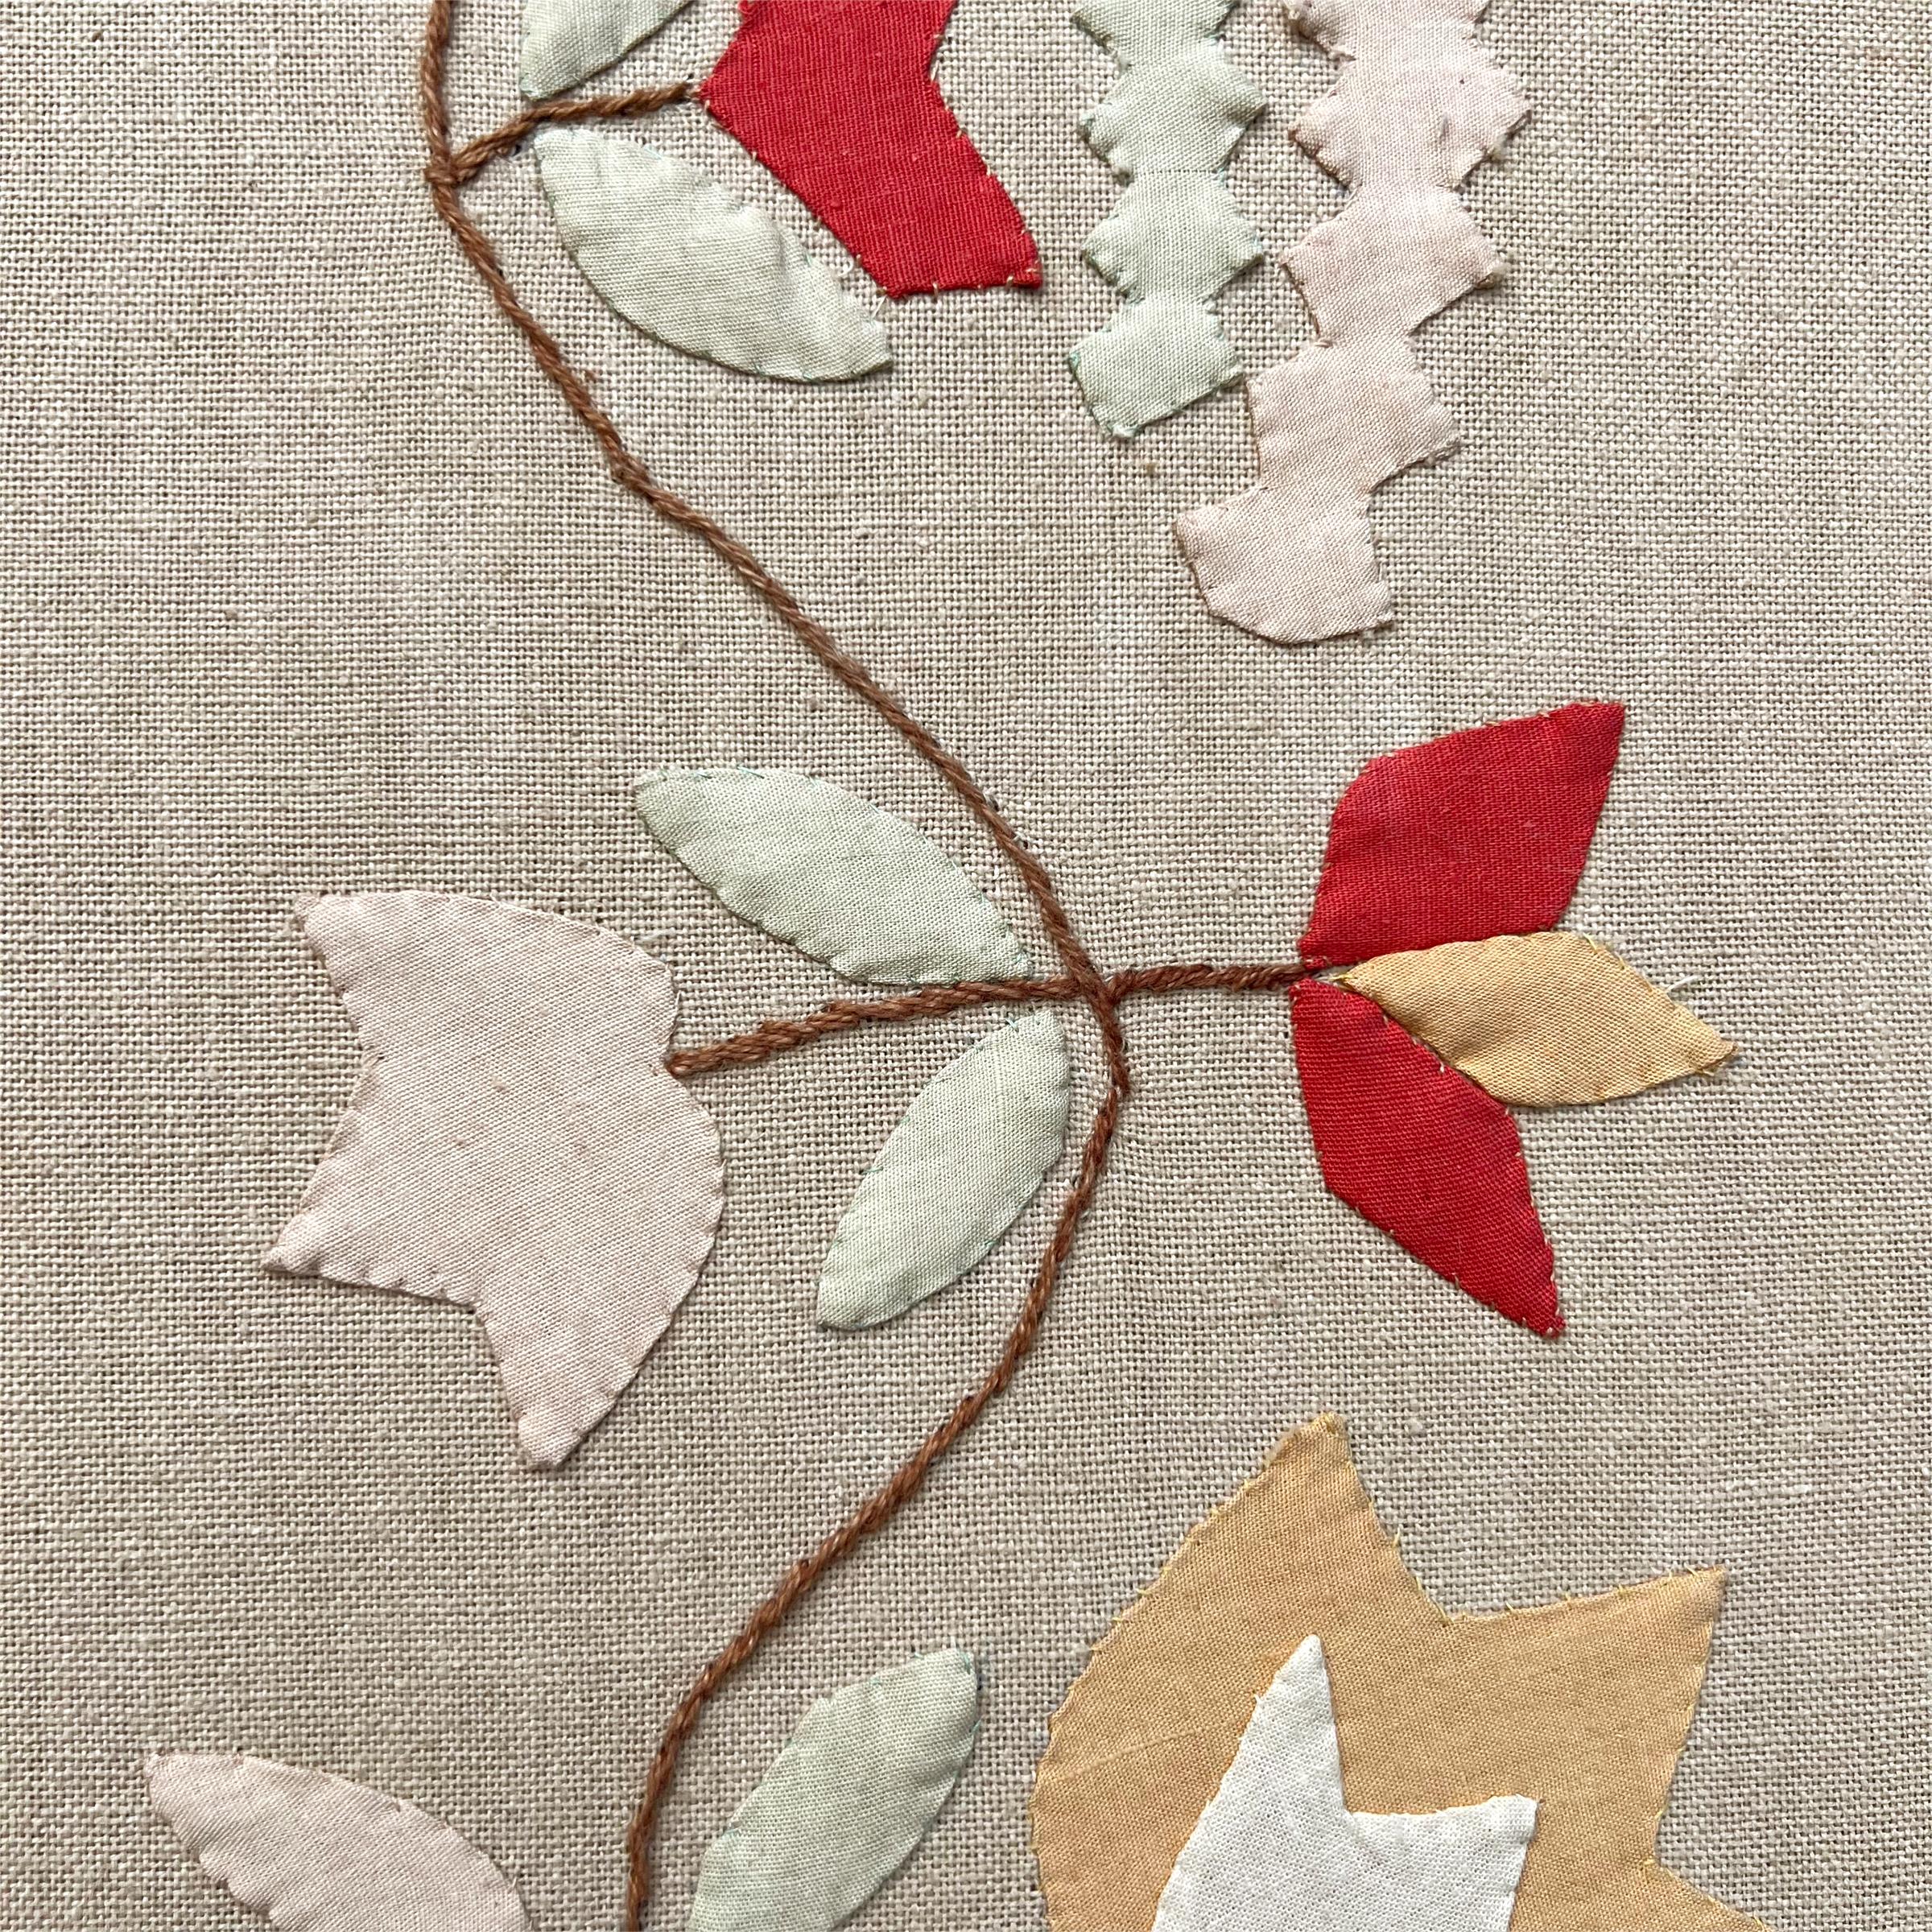 Mounted Late 19th Century American Appliqué Textile For Sale 8